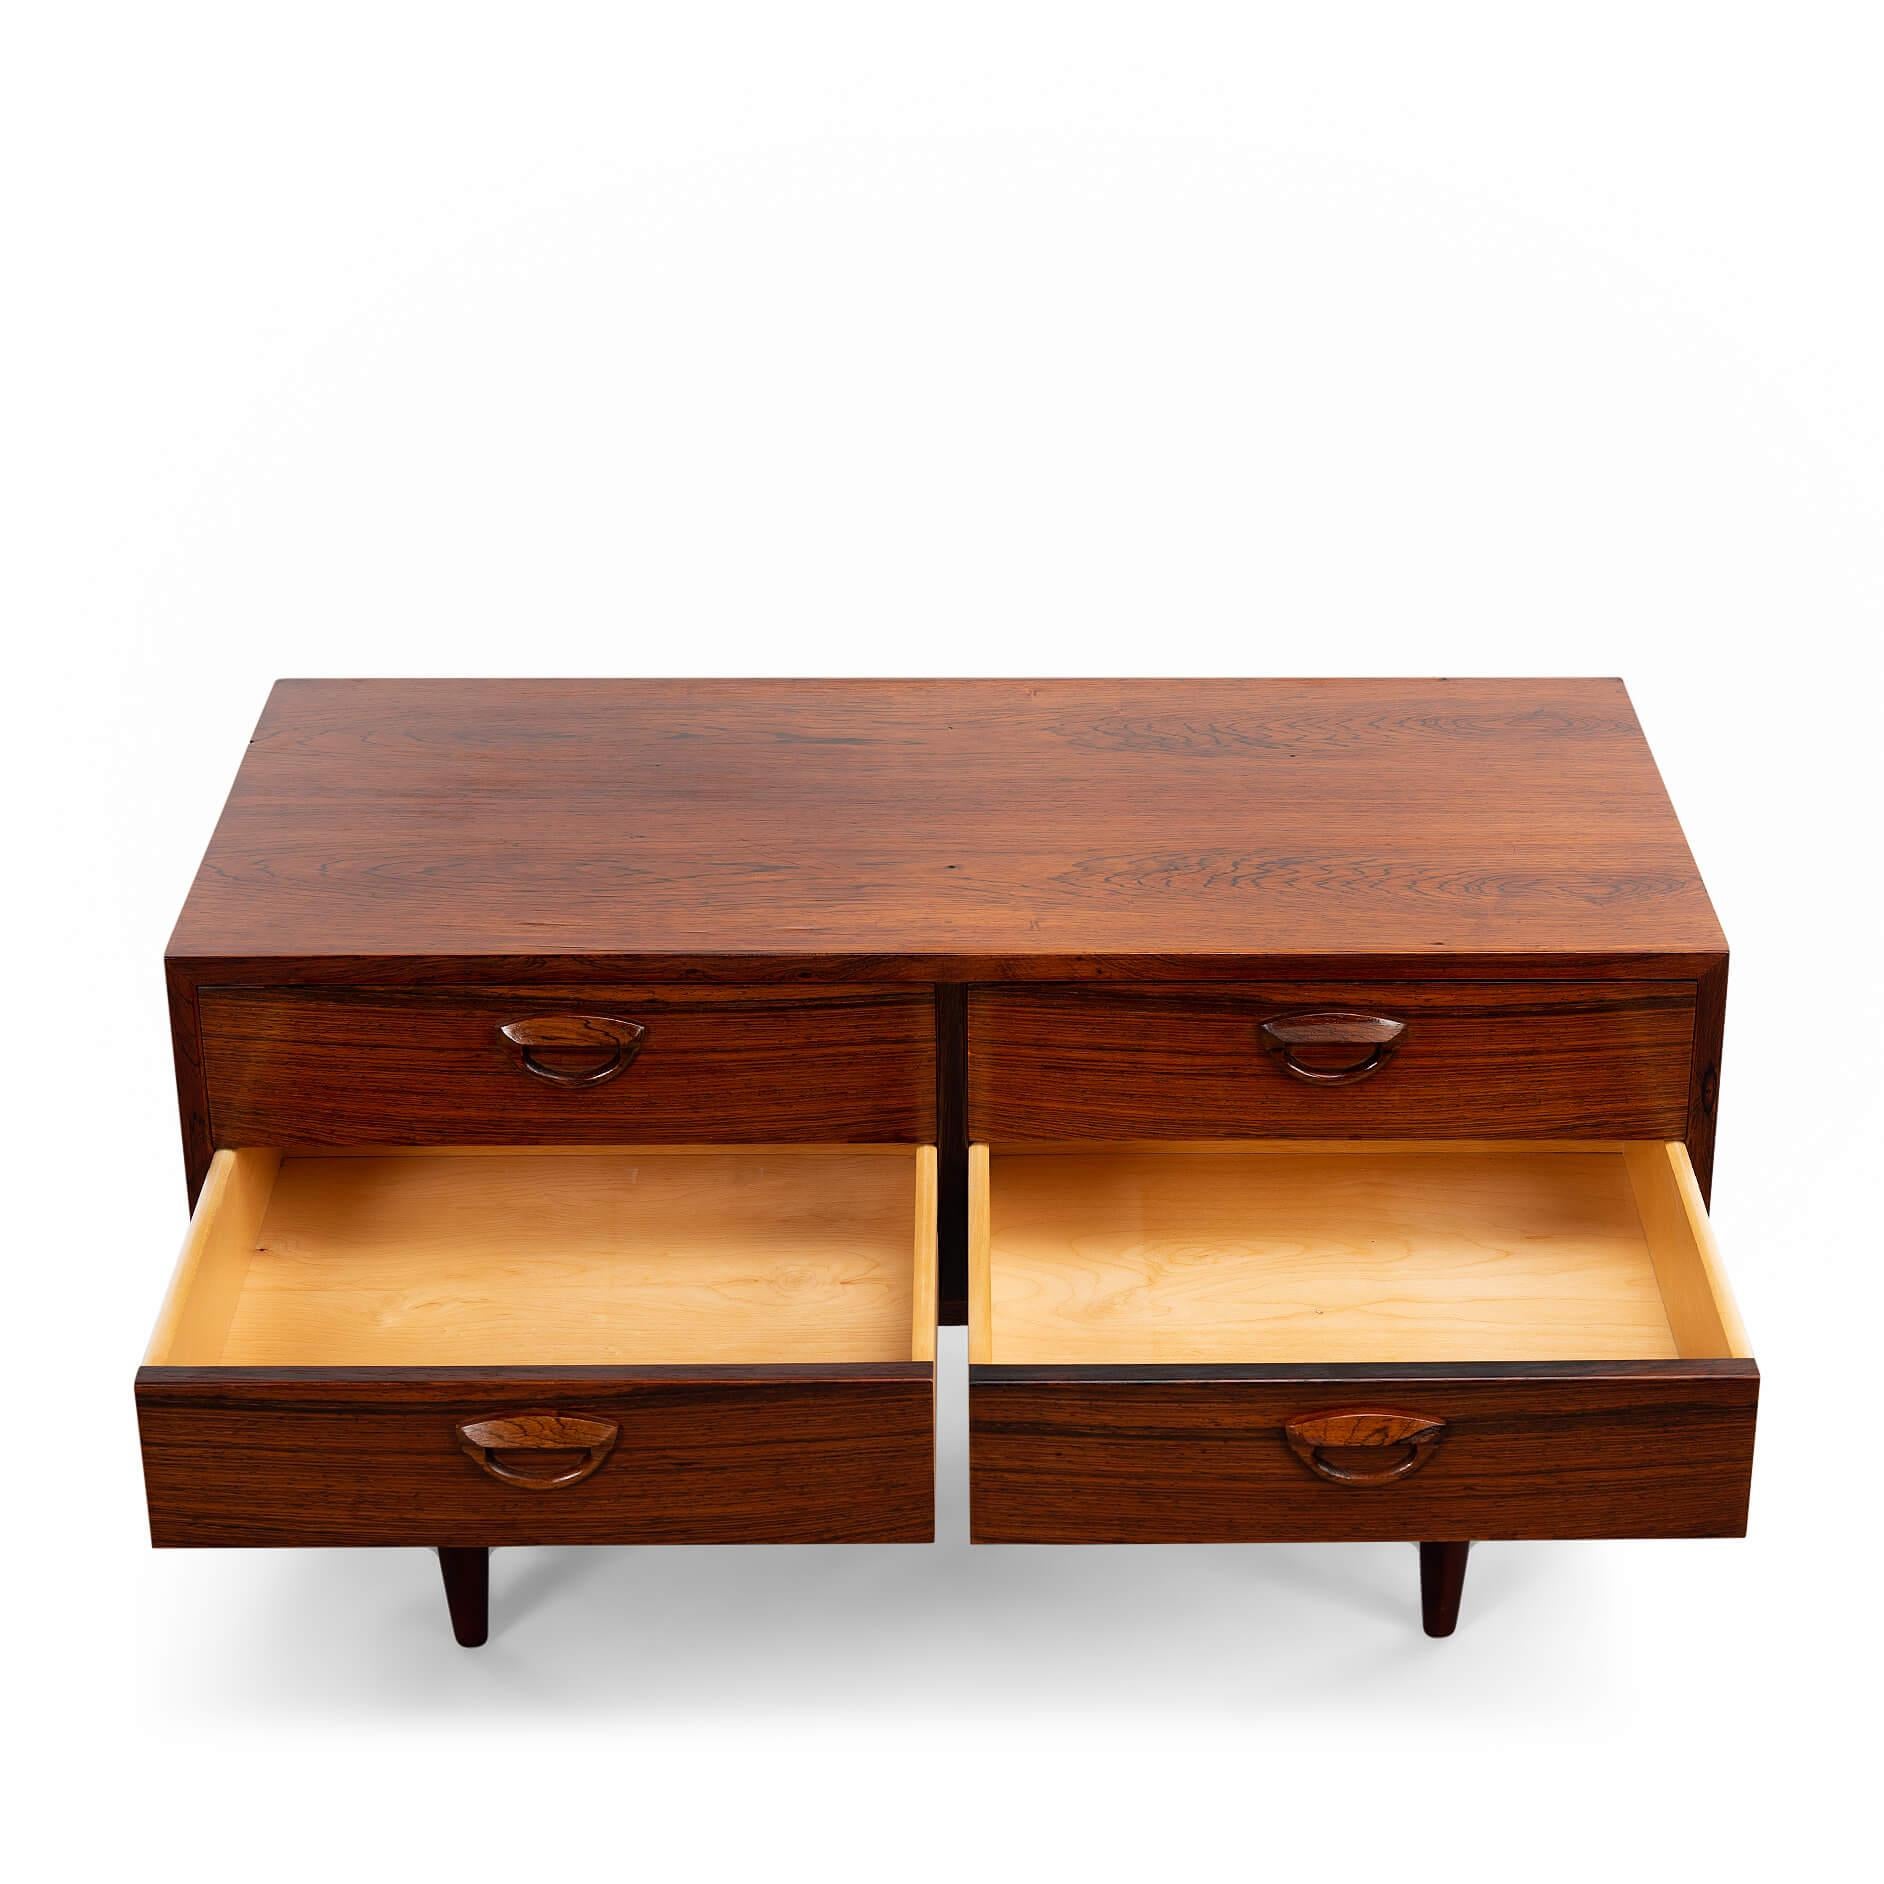 Small Rosewood Dresser by Kai Kristiansen for FM Møbler, 1960s For Sale 5